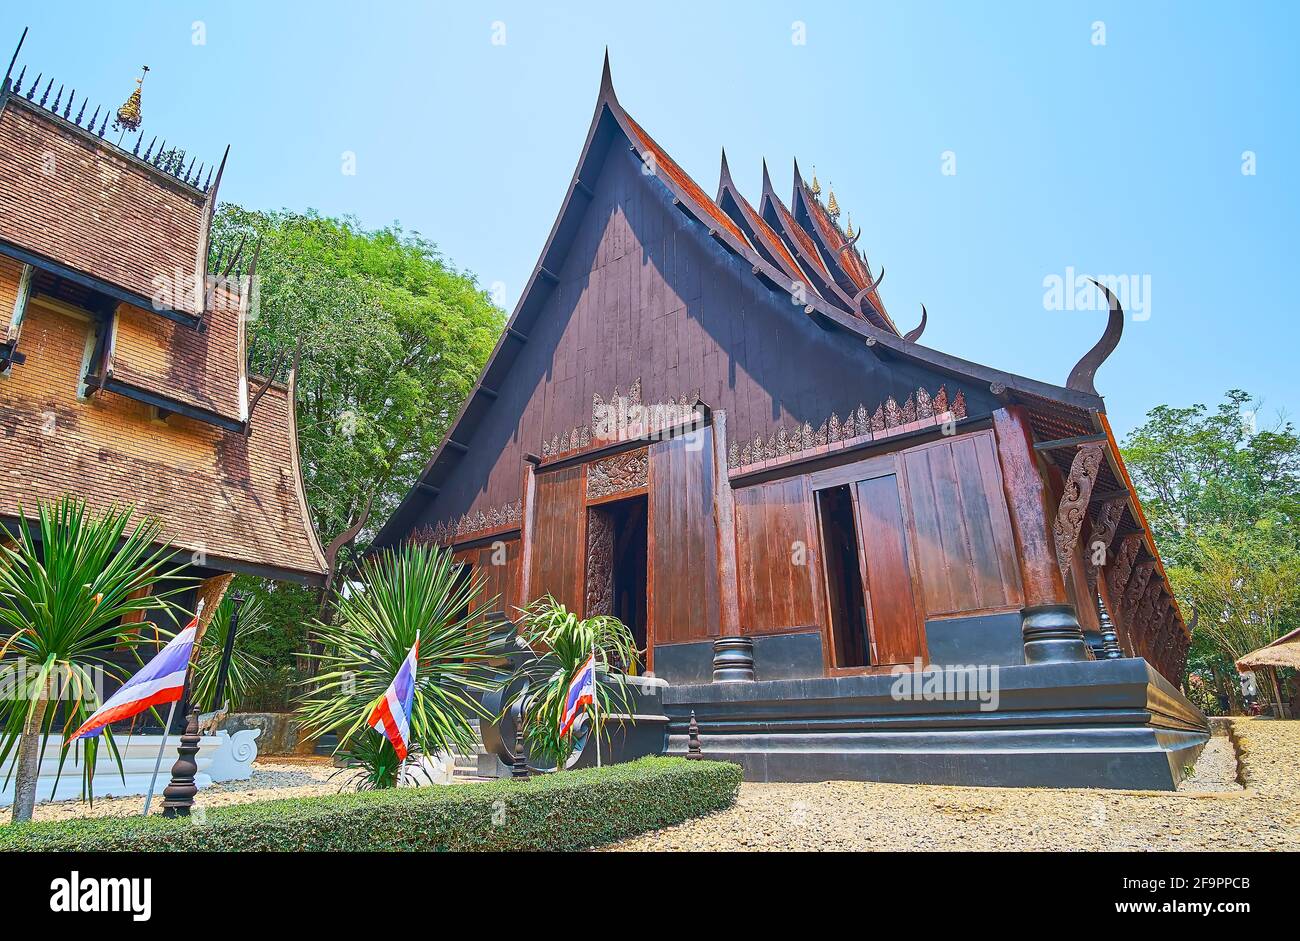 CHIANG RAI, THAILAND - MAY 11, 2019: The Main Sanctuary Hall of Black House (Baan Dam) complex is a fine example of the Lanna style architecture with Stock Photo